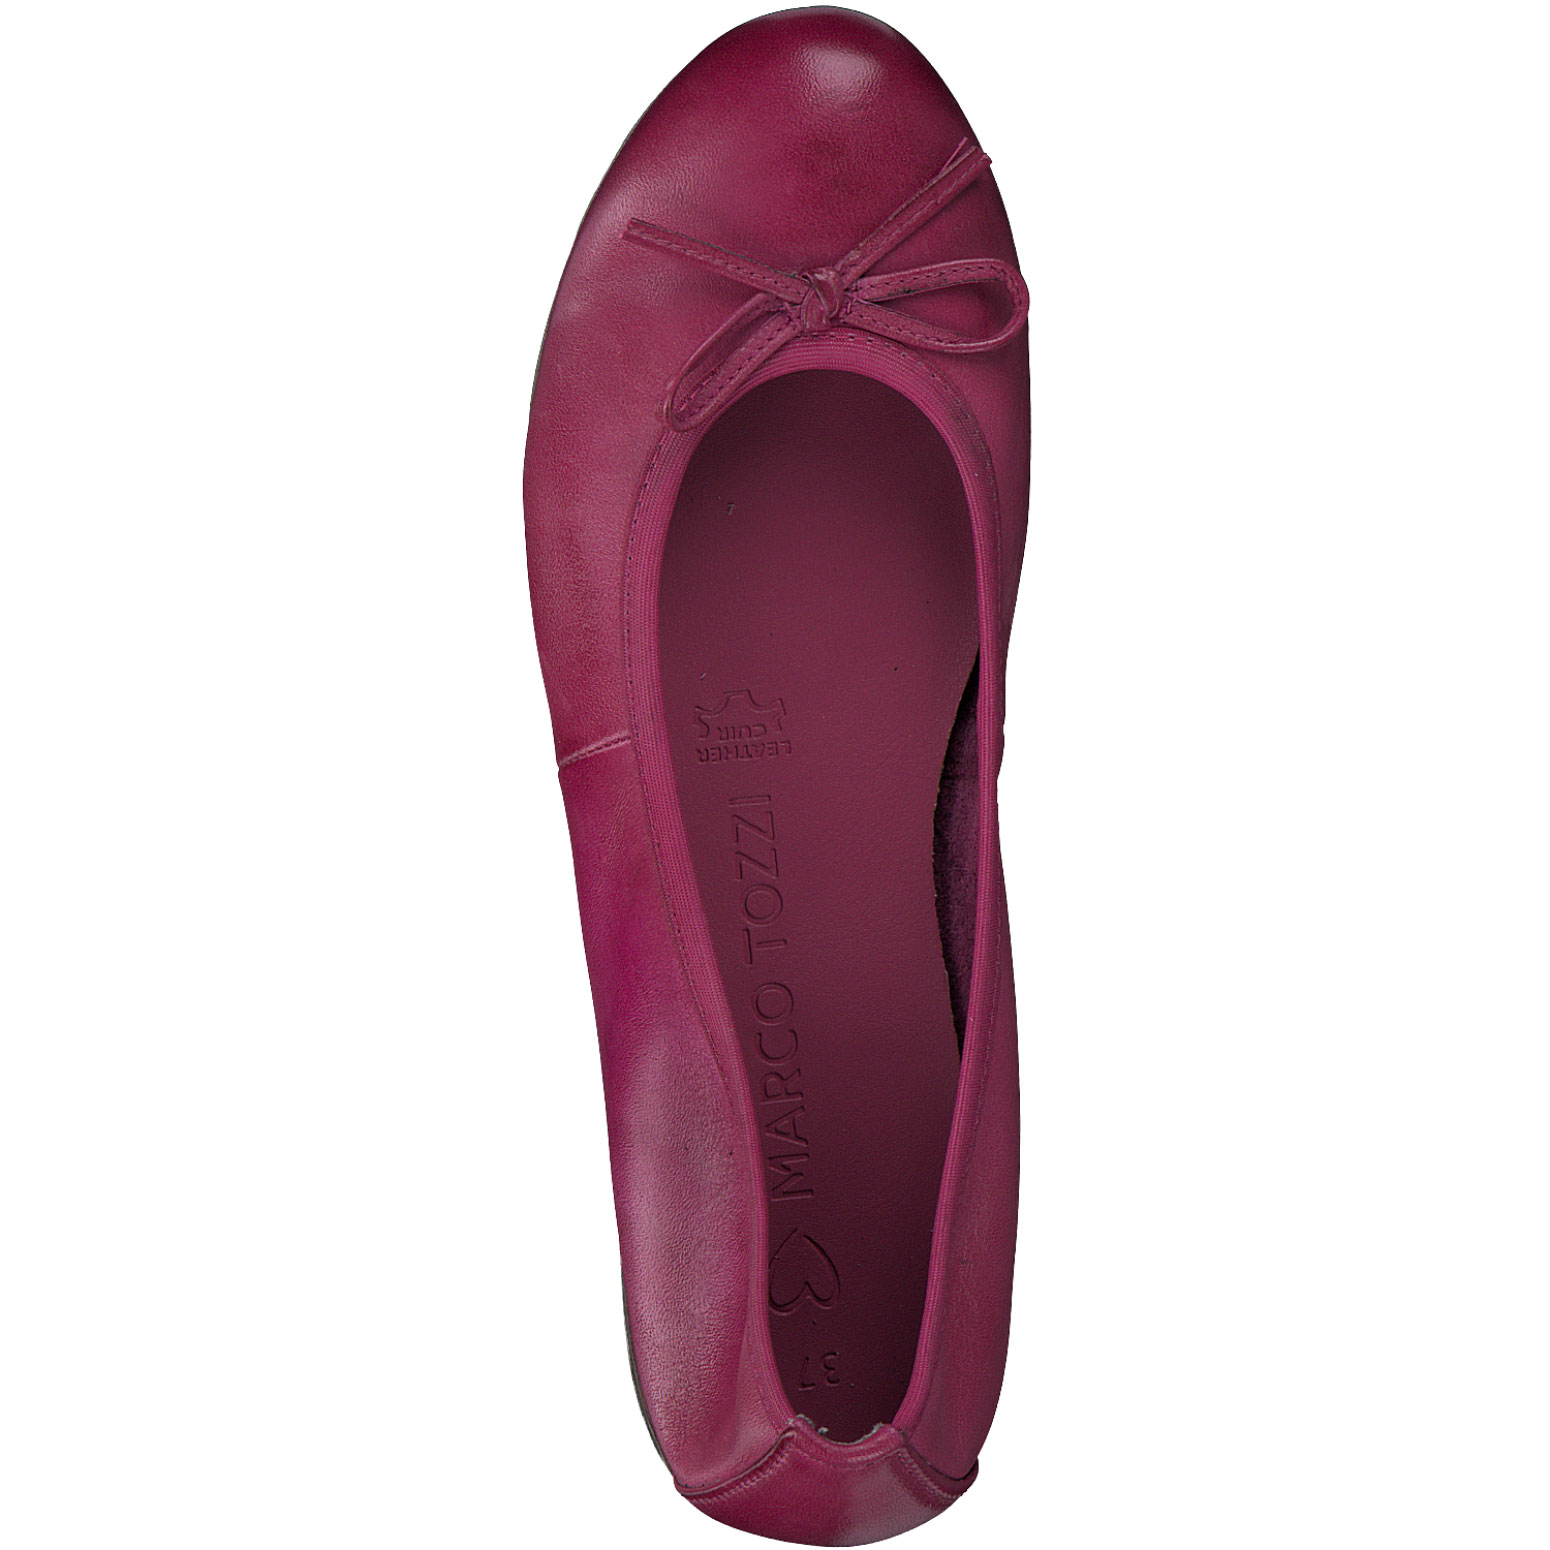 Marco Tozzi Ballerina - Pink smooth leather